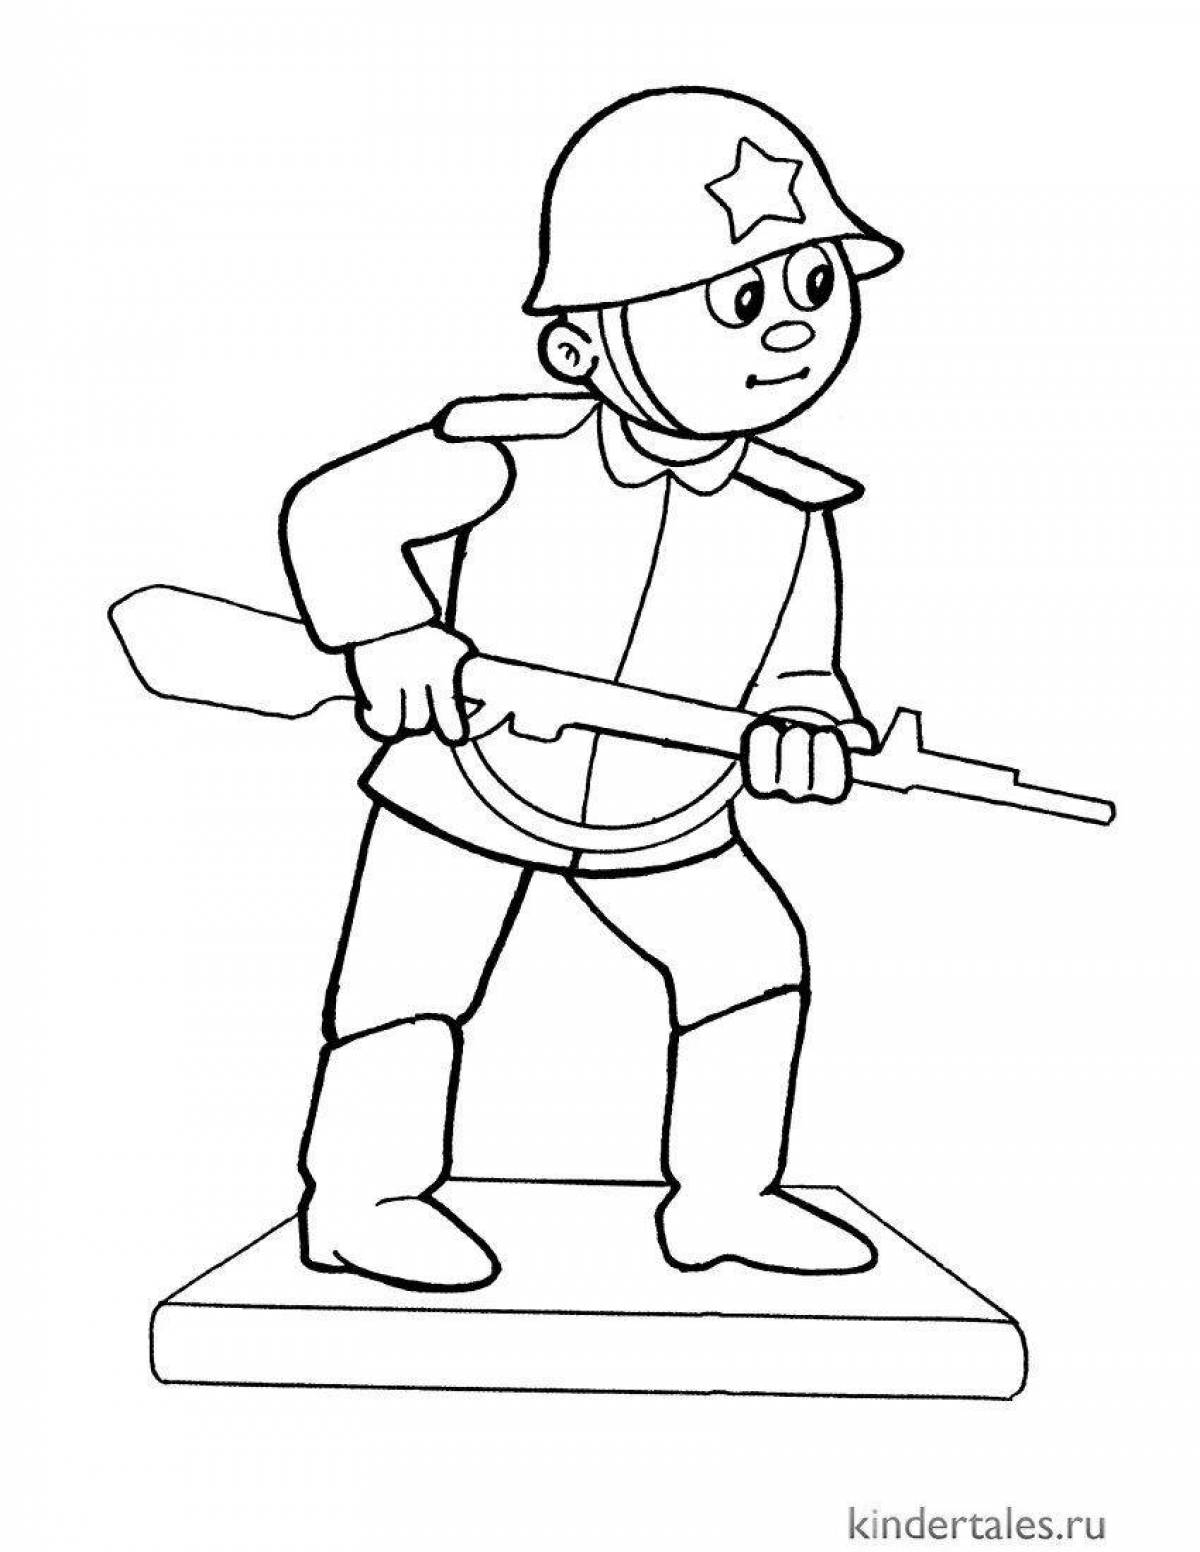 Creative soldier coloring book for 3-4 year olds